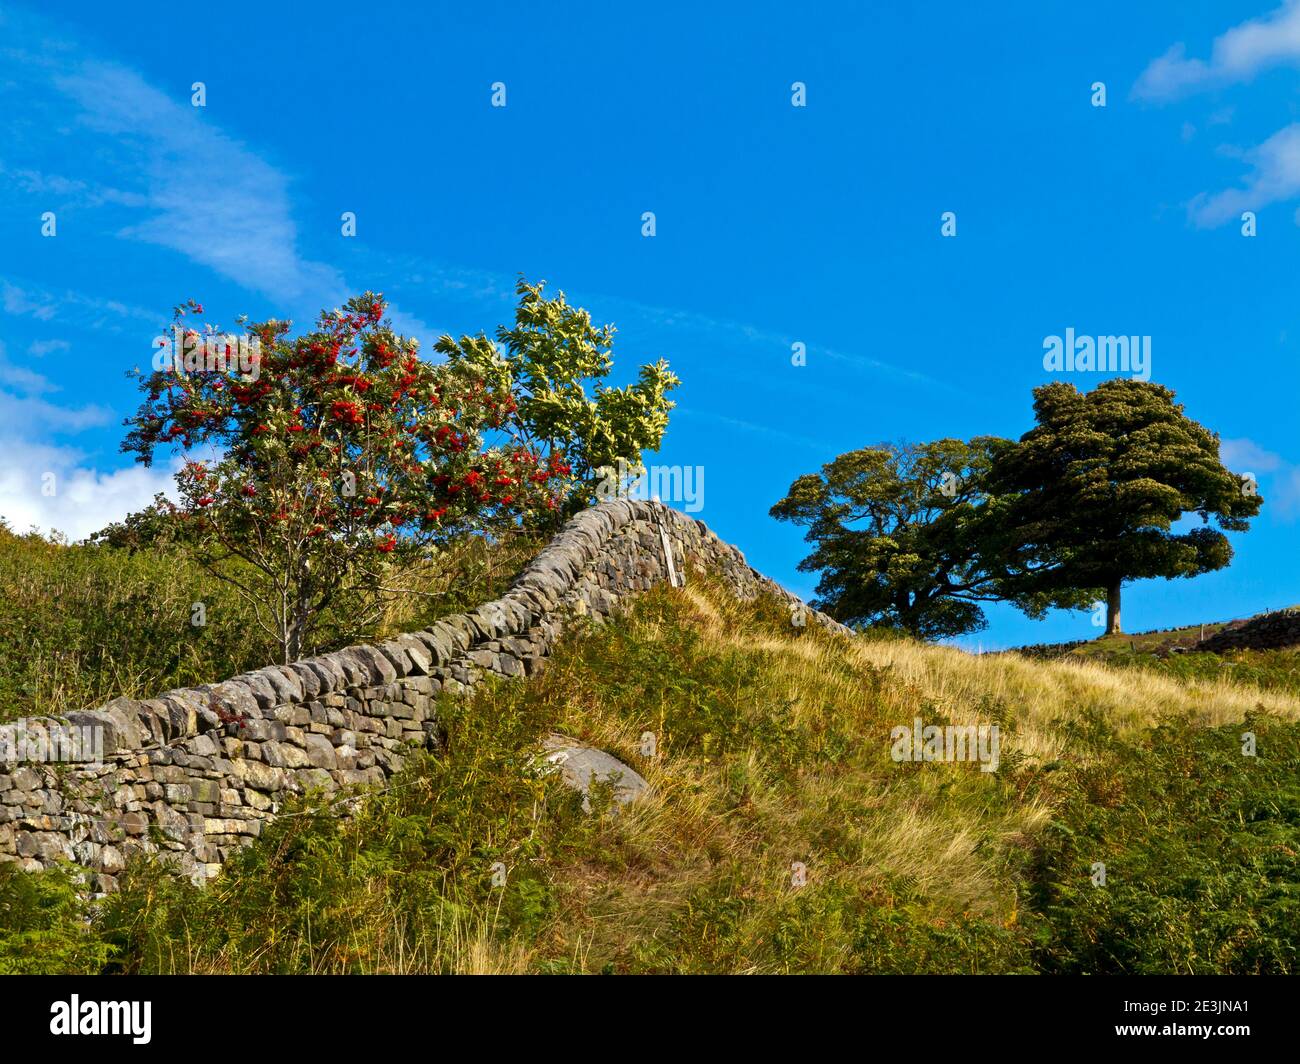 Late summer view of trees and drystone wall at Curbar Gap near Curbar Edge in the Peak District National Park Derbyshire England UK Stock Photo